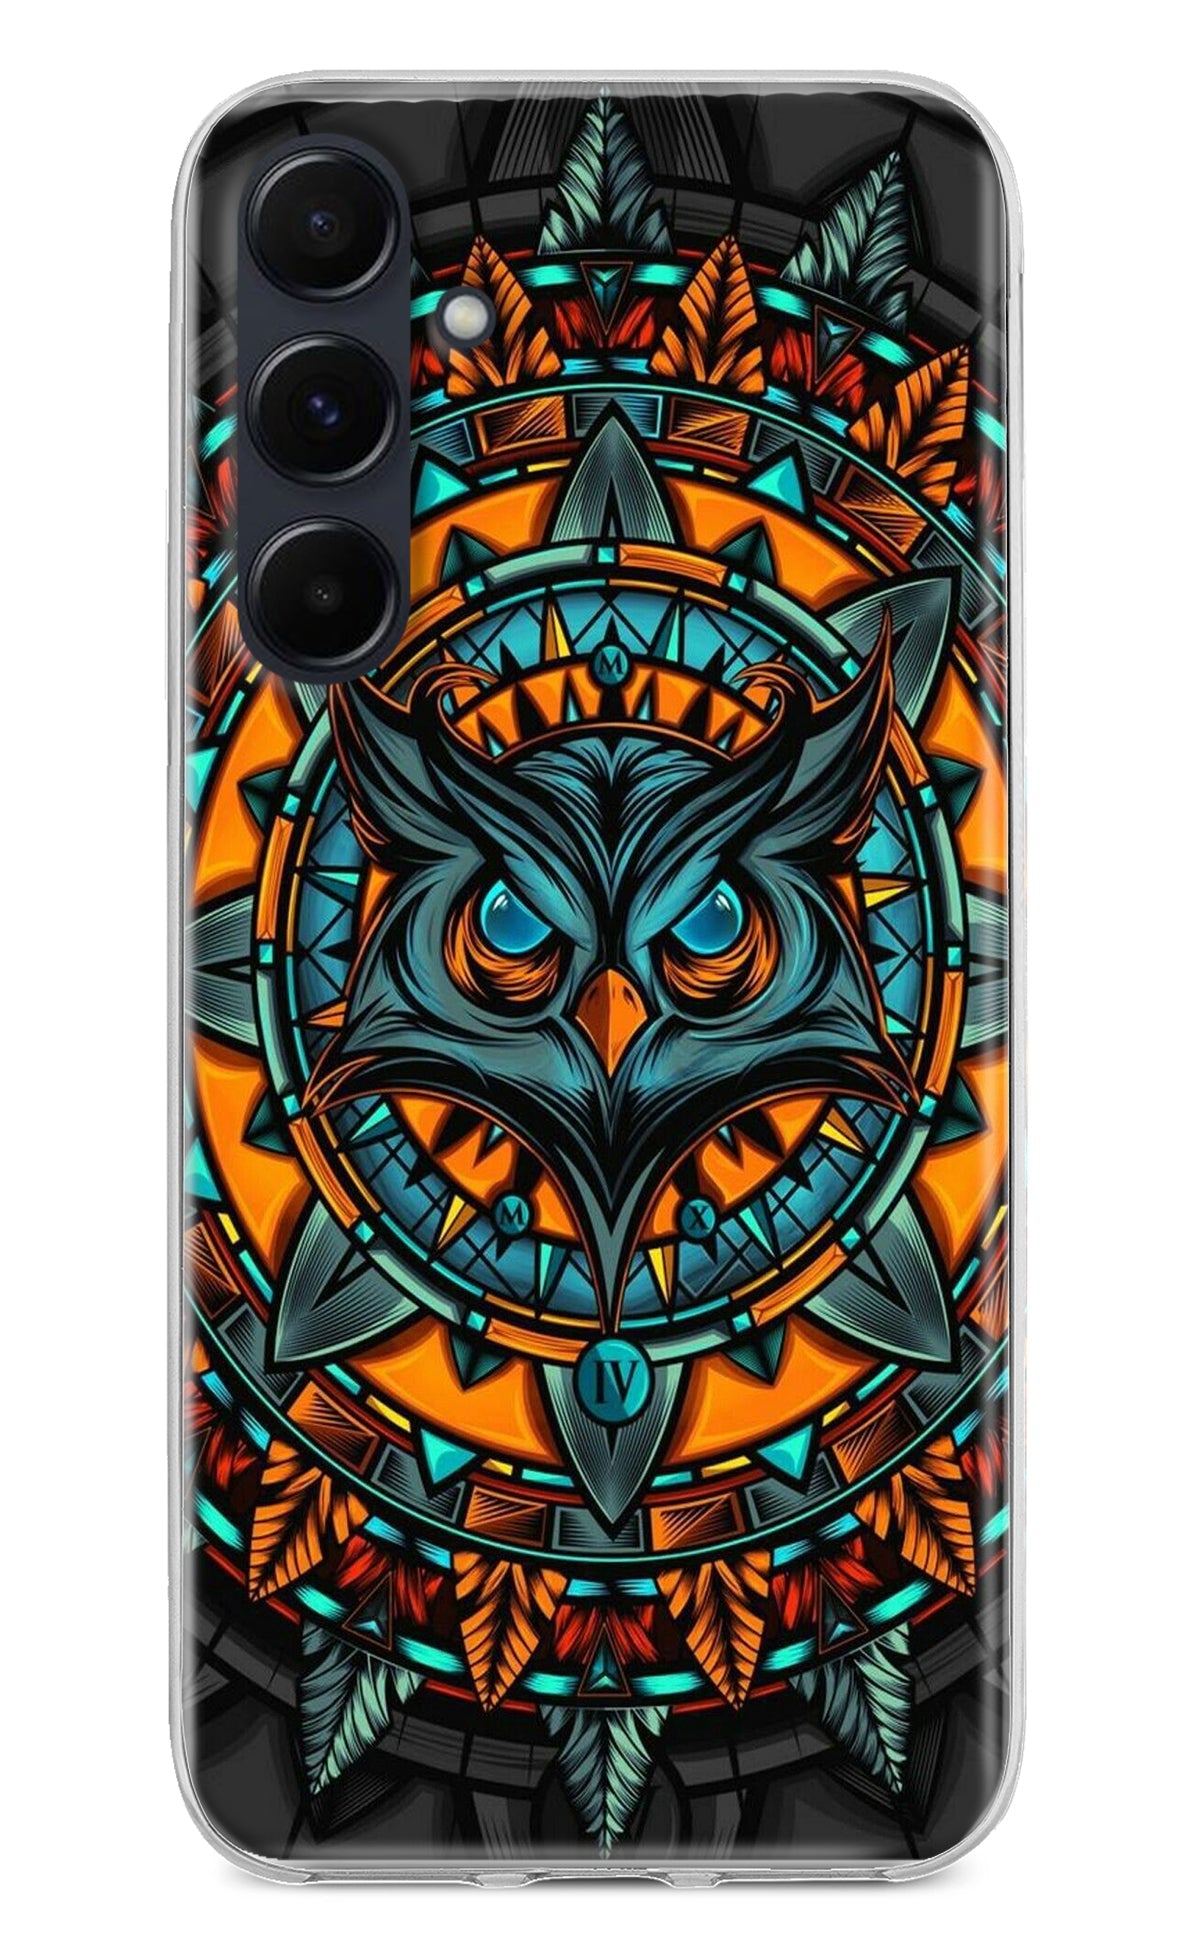 Angry Owl Art Samsung A35 5G Back Cover